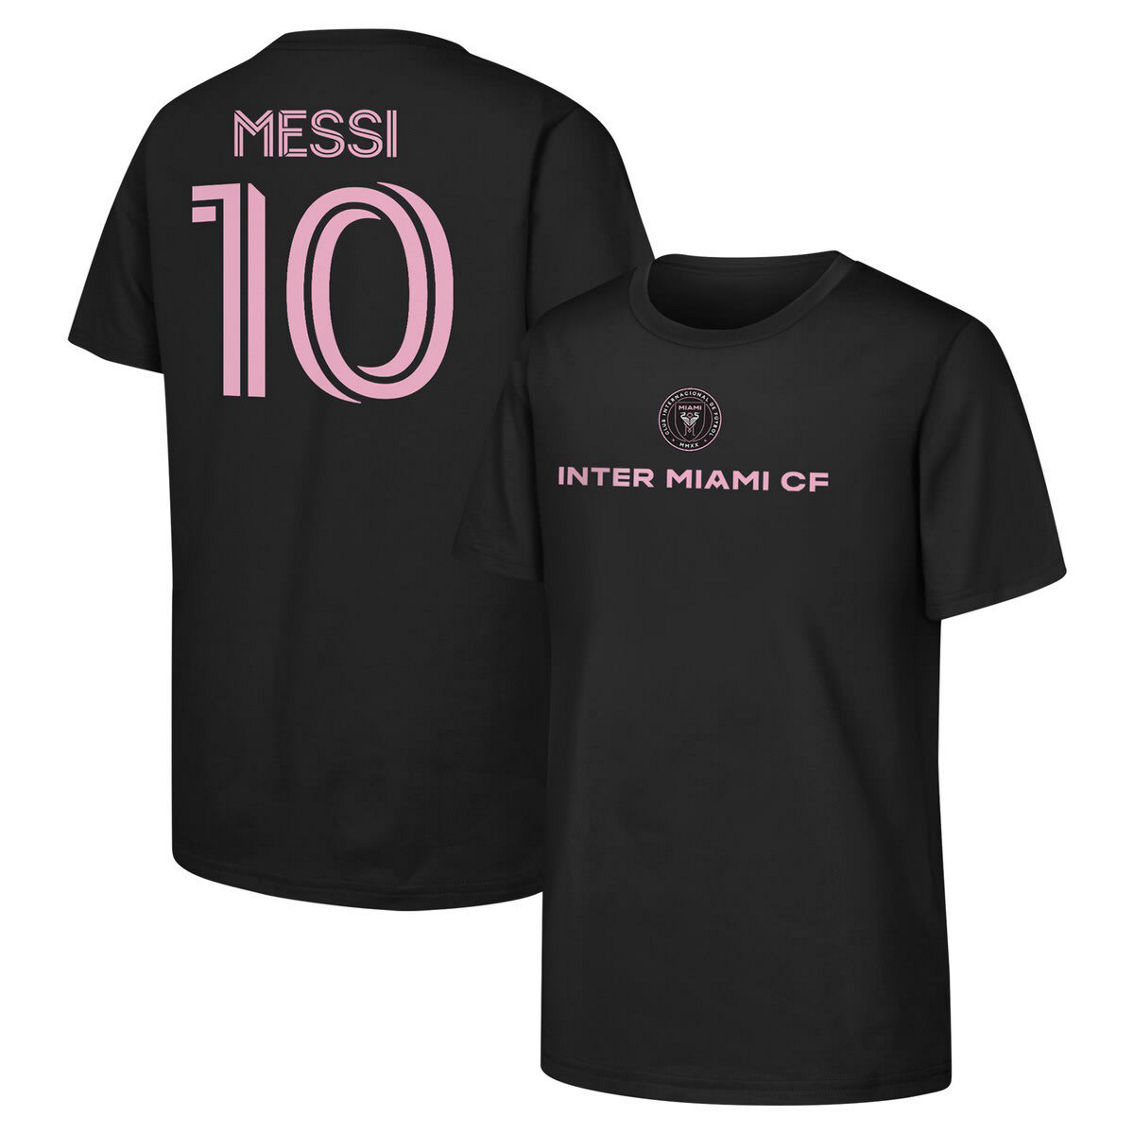 Outerstuff Preschool Lionel Messi Black Inter Miami CF Name & Number T-Shirt - Image 2 of 4